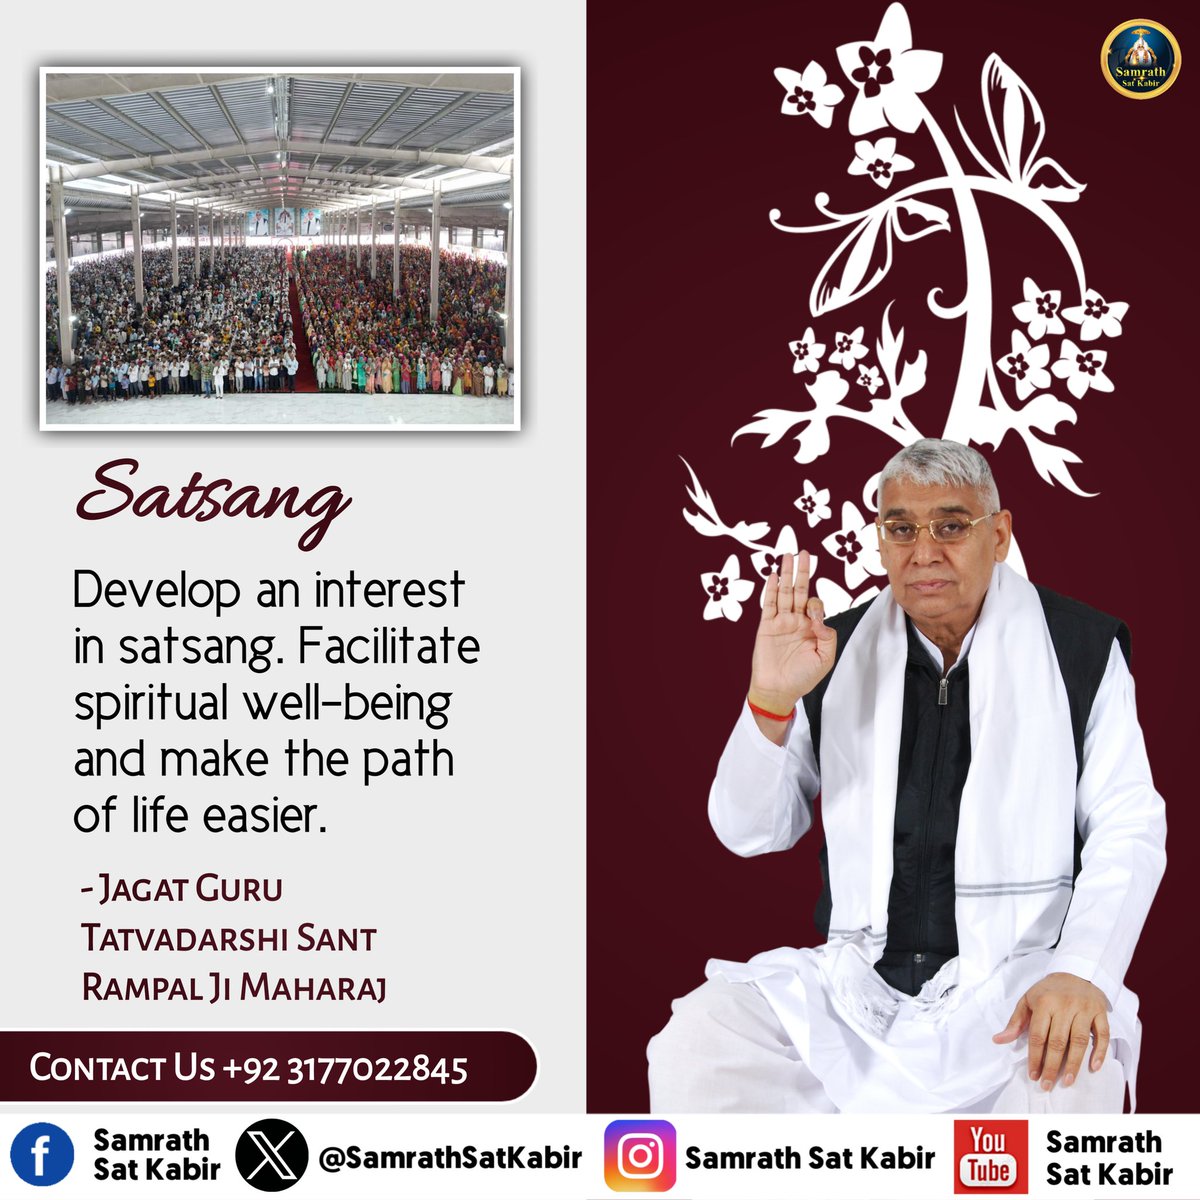 #GodMorningFriday The true and correct way of worship is only provided by an enlightened saint i.e. The “Tatvadarshi” Saint. Having a Guru (Spiritual Leader) is of utmost importance in the path of attaining salvation. #fridaymorning #FridayThoughts